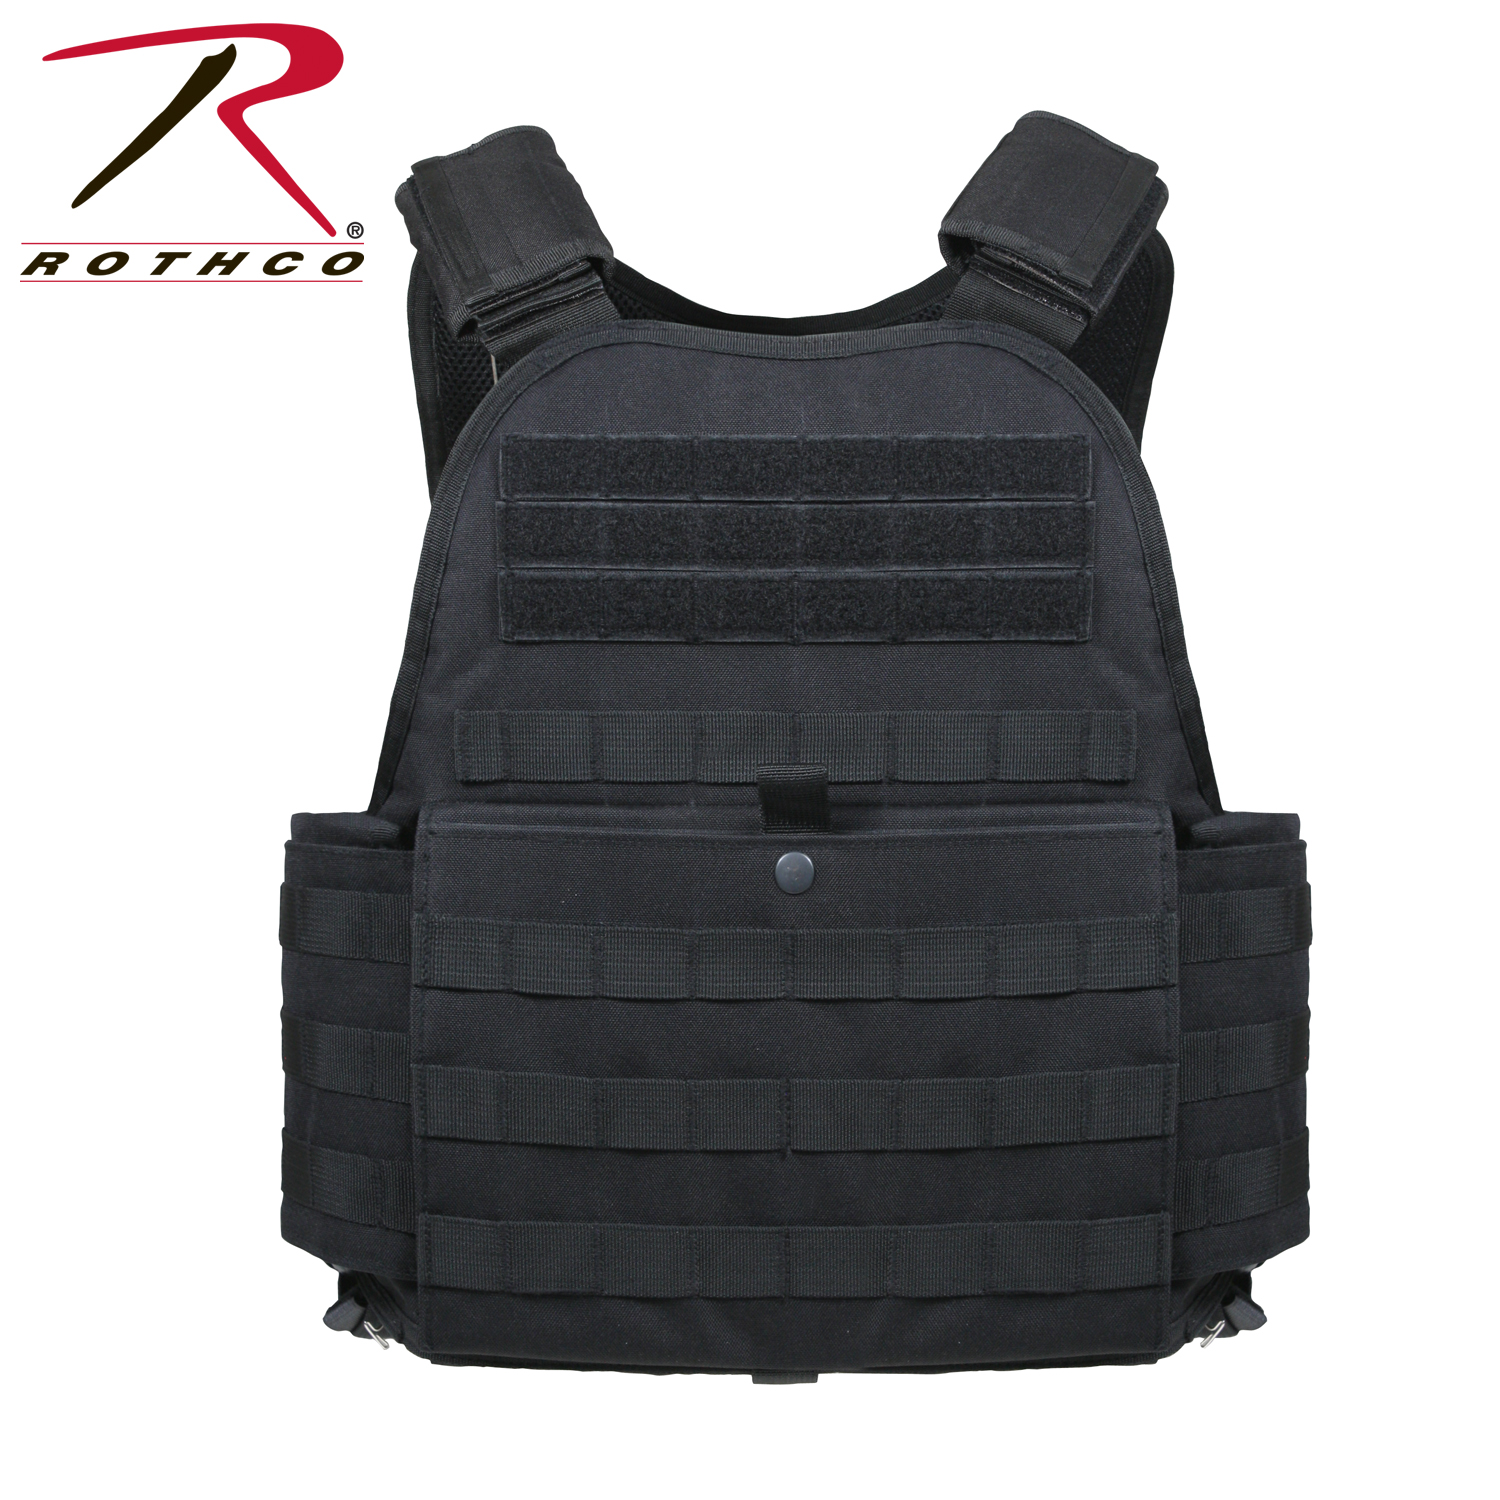 892 Black Coyote New Rothco Tactical Molle Plate Carrier Vest Olive 